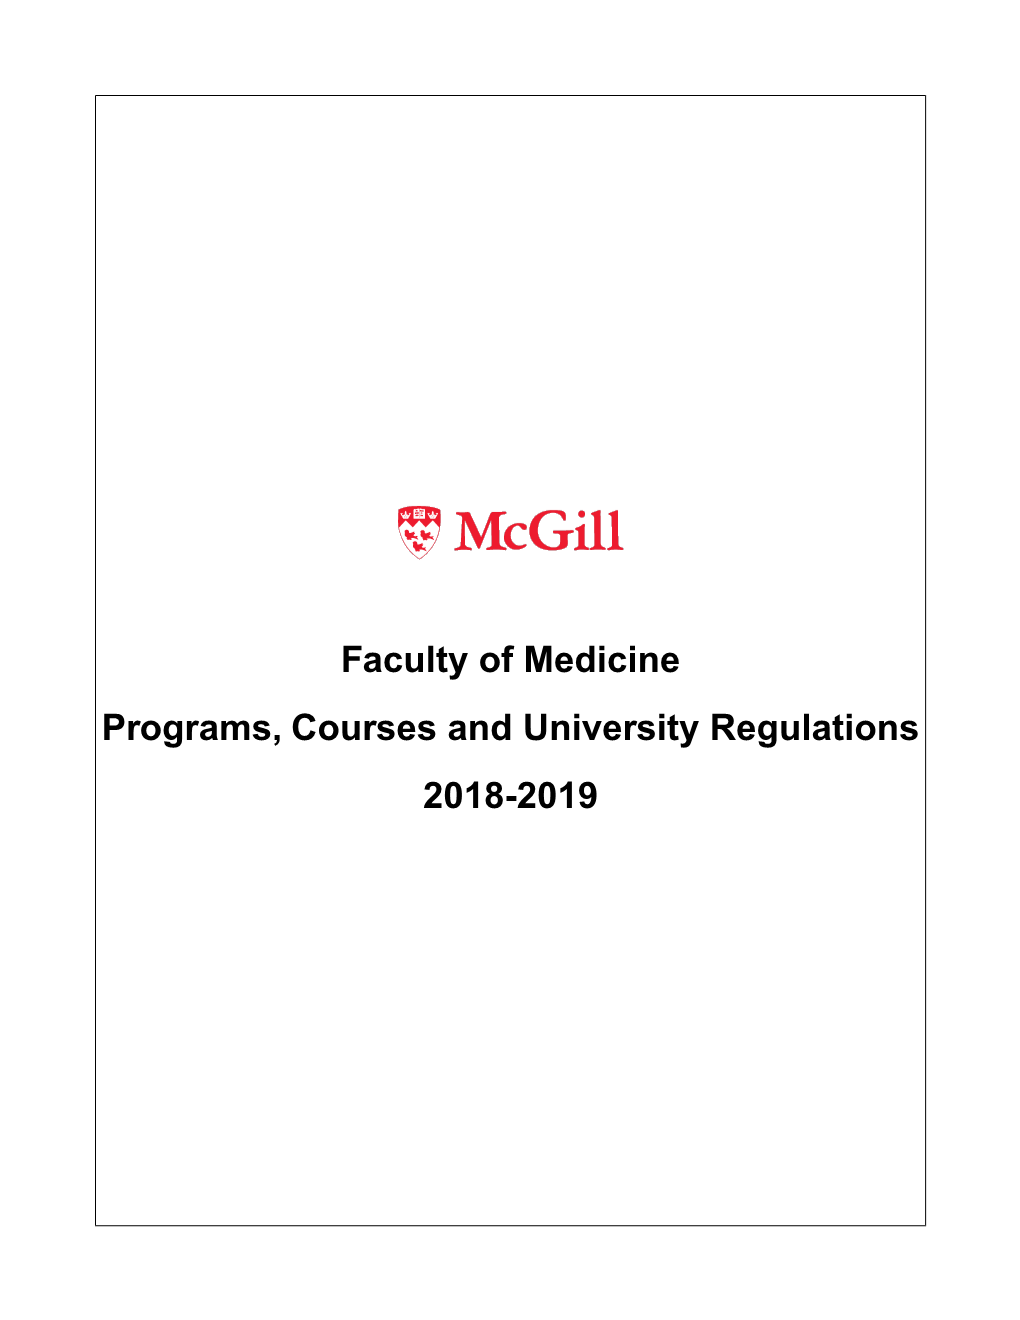 Faculty of Medicine Programs, Courses and University Regulations 2018-2019